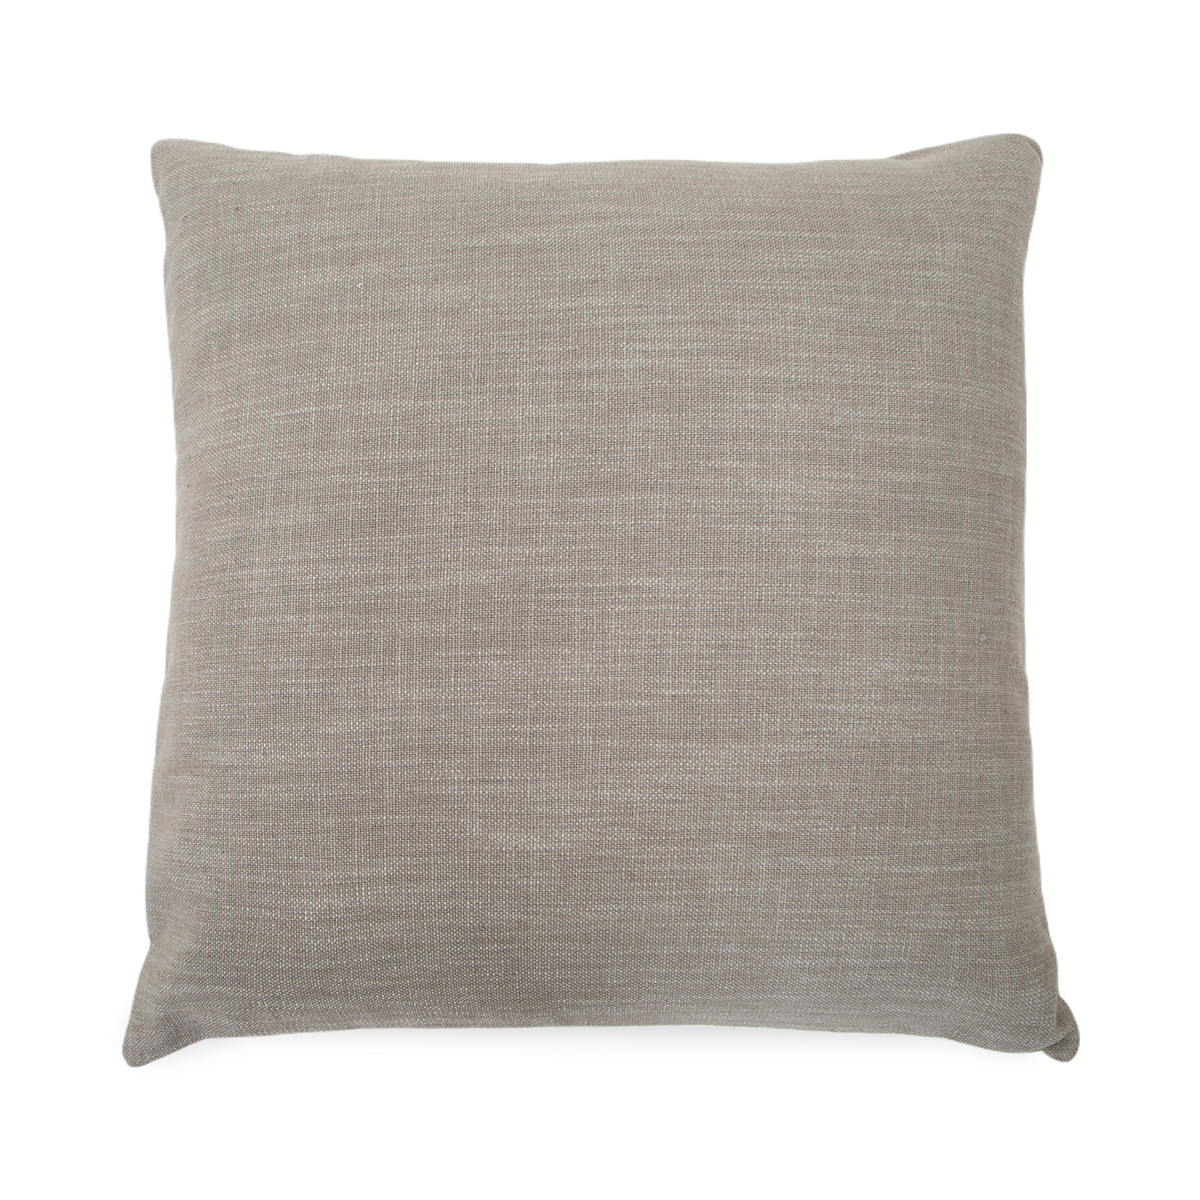 Simple and clean, the Linus Linen Pillow is made from 100% pure linen in a stone moss colour.